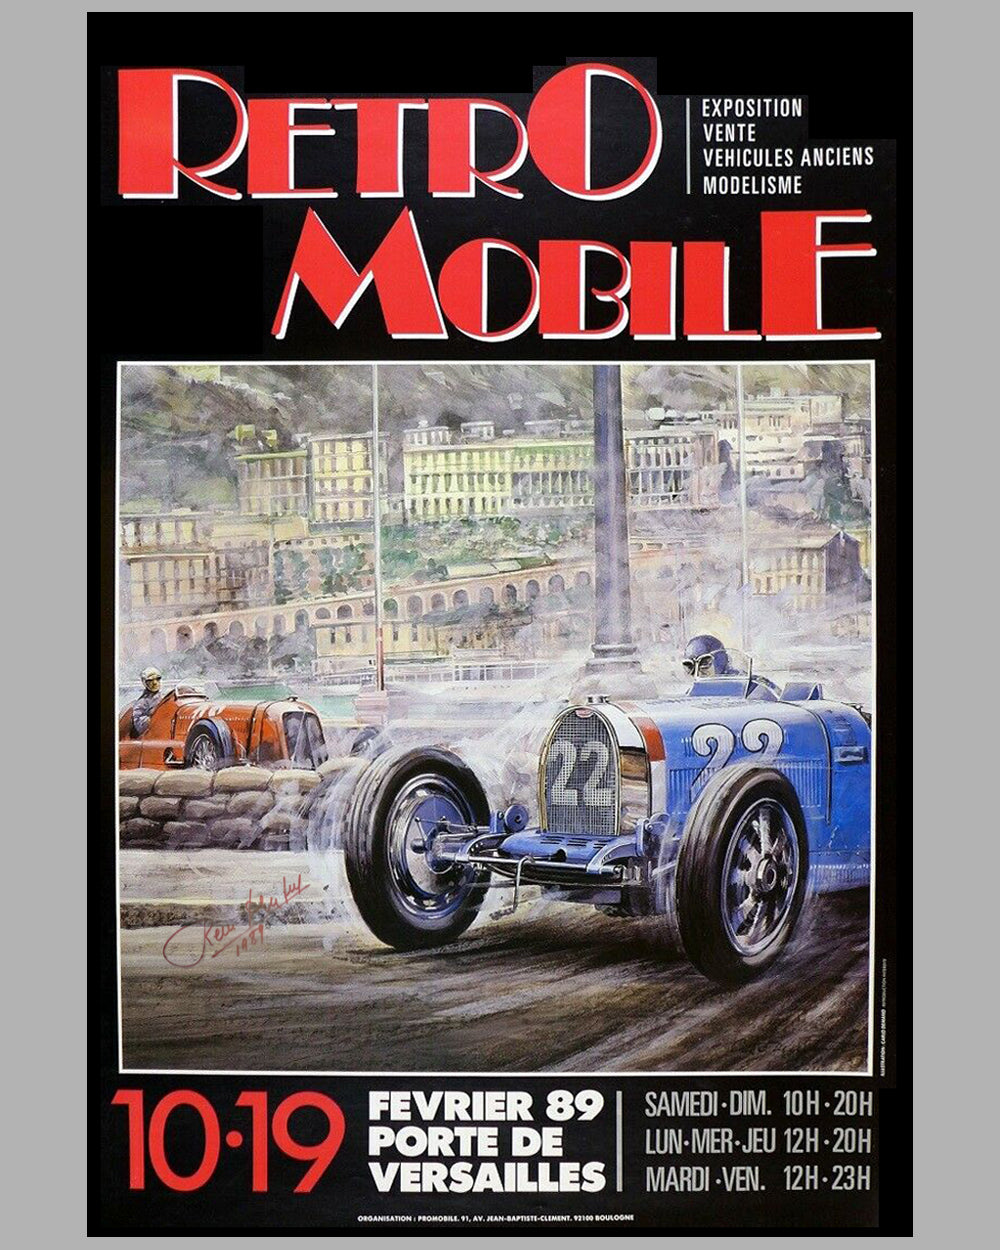 Retromobile event poster by Carlo Demand, autographed by Rene Dreyfus